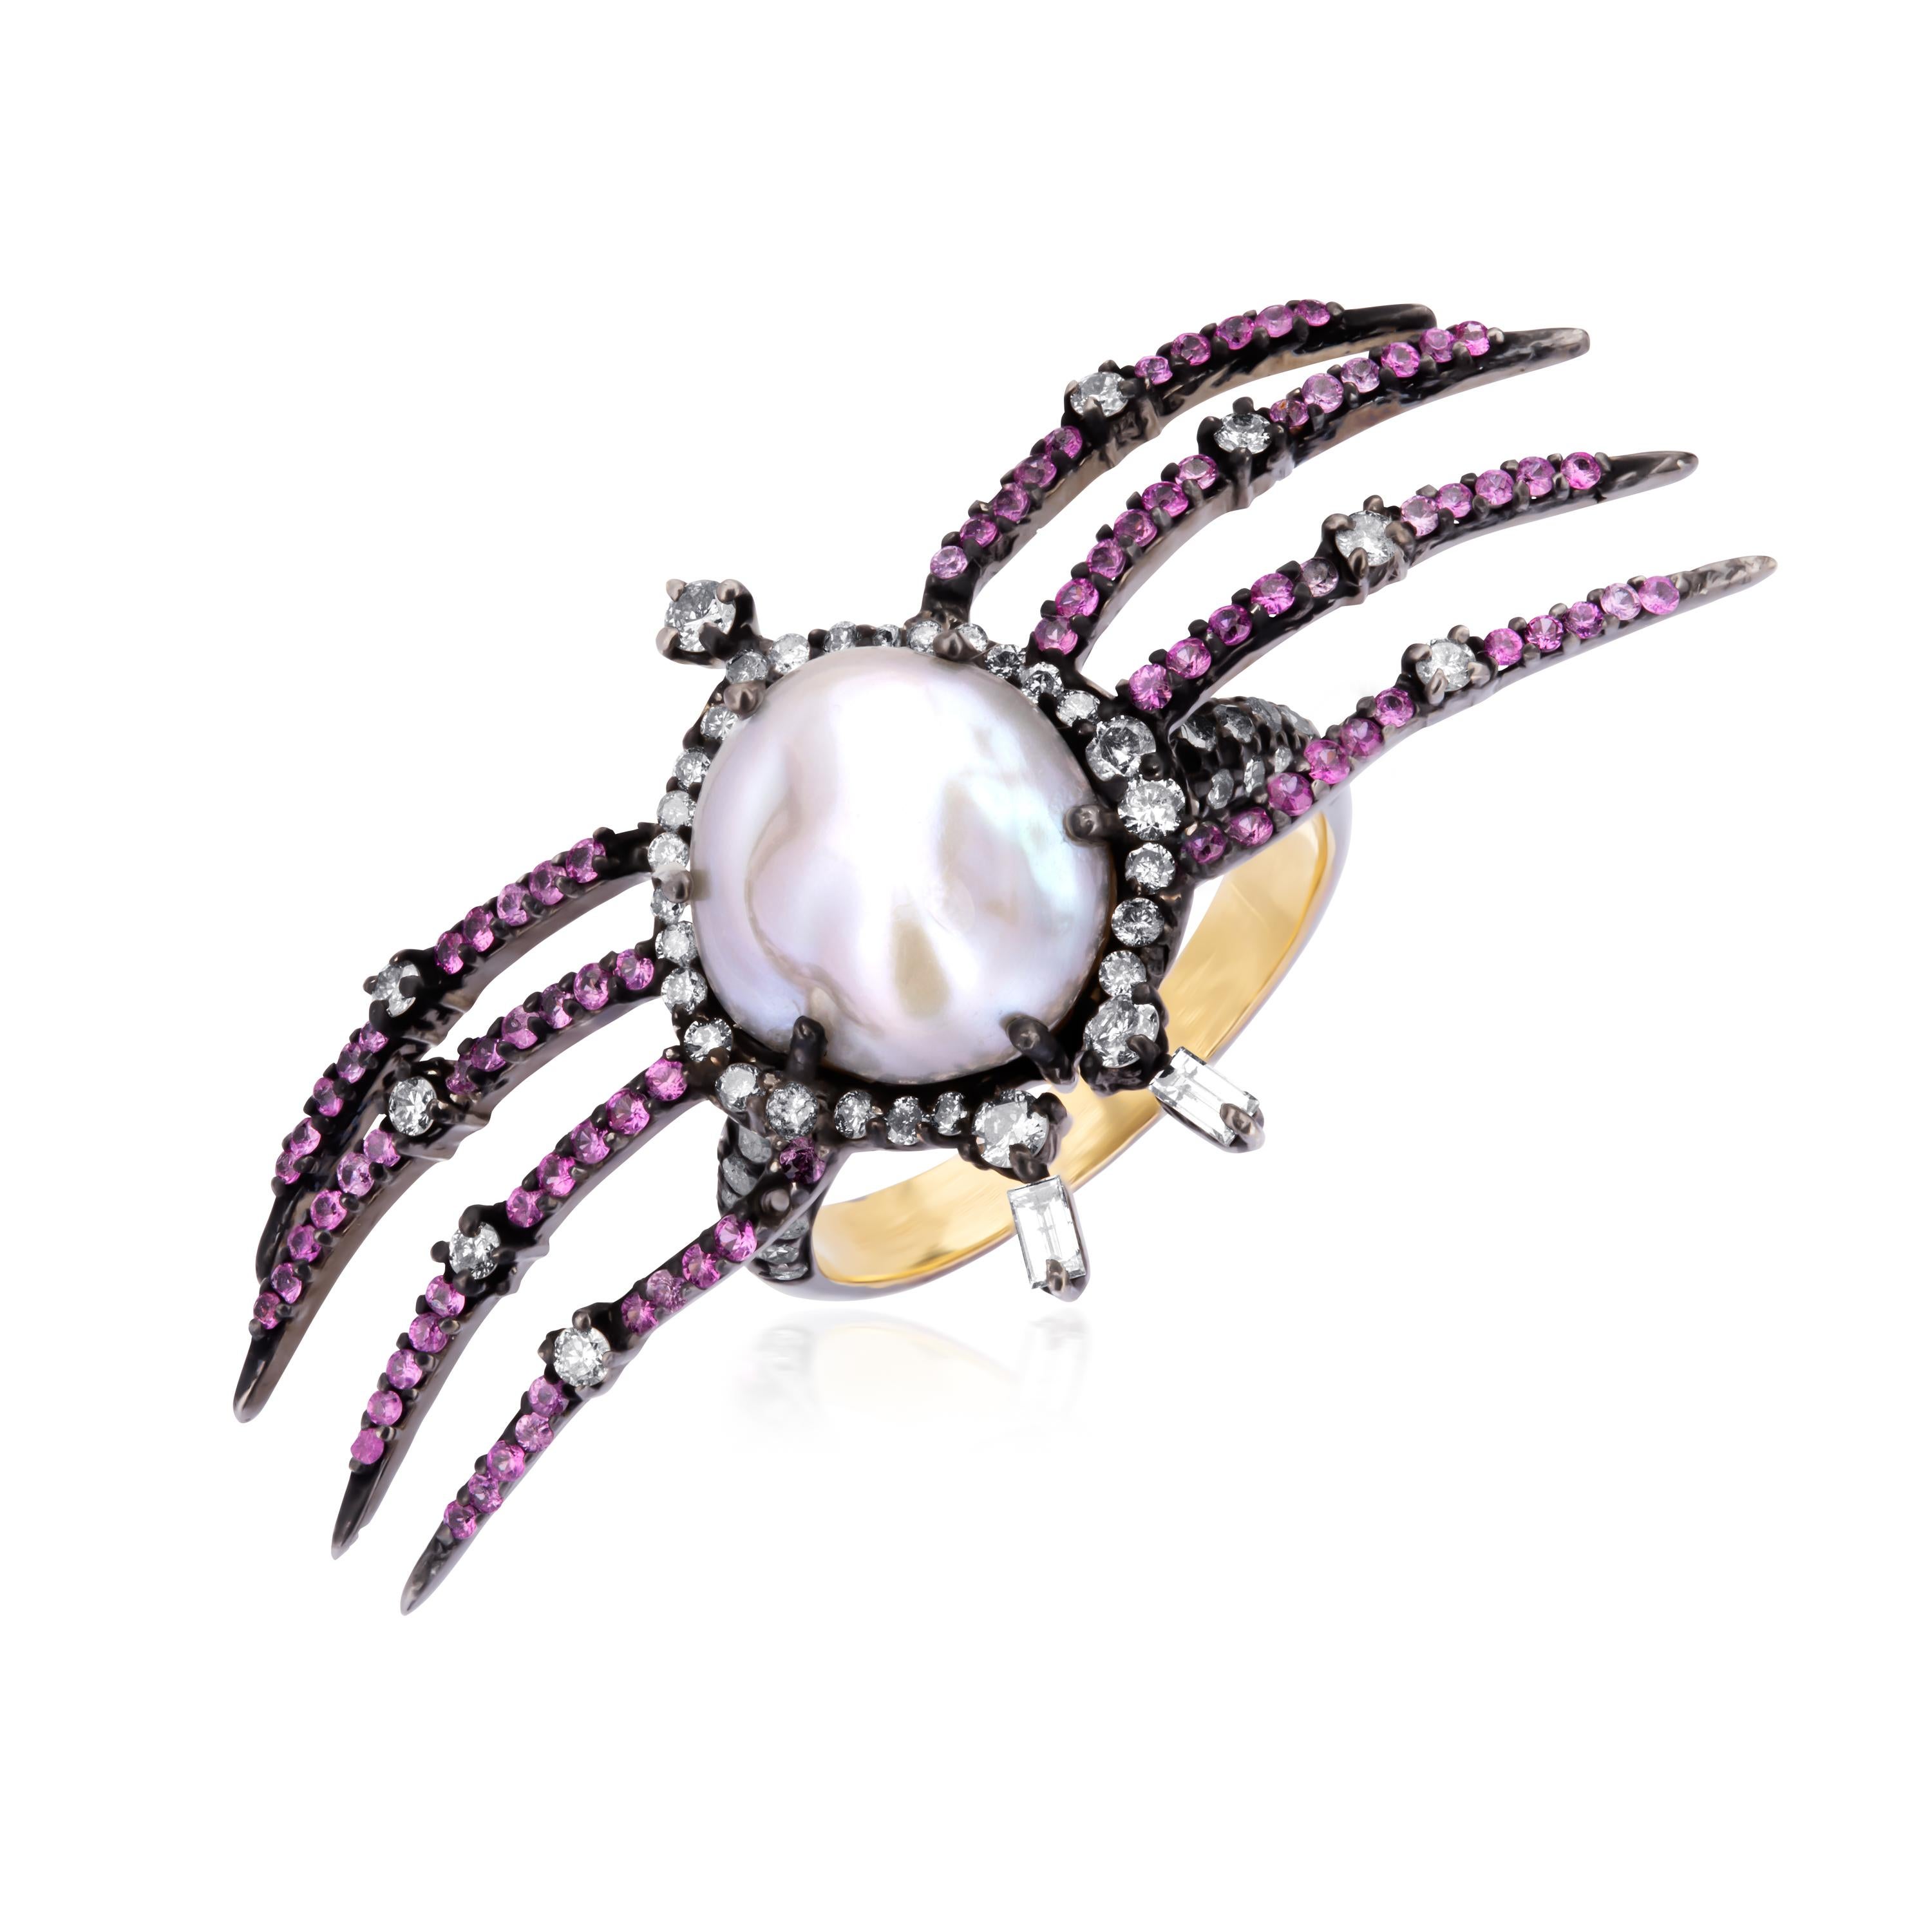 This classic Victorian ring showcases a crafty arachnid alighted with a satiny pearl at the center accentuated with pink sapphires and diamonds (IJ Color, SI Clarity) adorning it's legs. Rendered in 18K gold this whimsical ring, is the perfect match